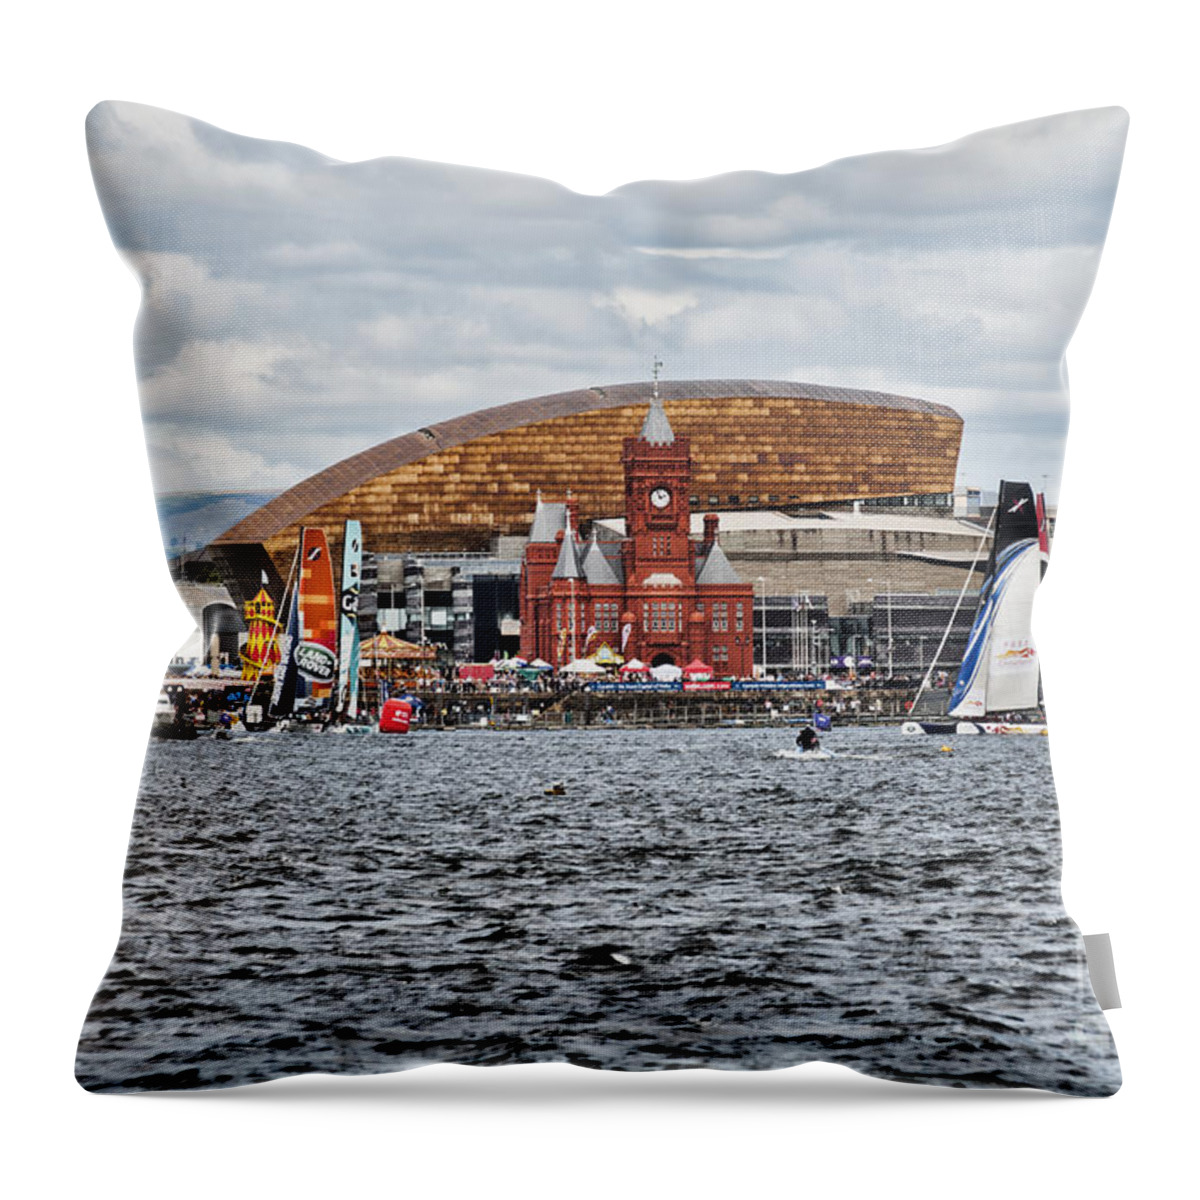 Extreme 40 Catamarans Throw Pillow featuring the photograph Extreme 40 At Cardiff Bay by Steve Purnell